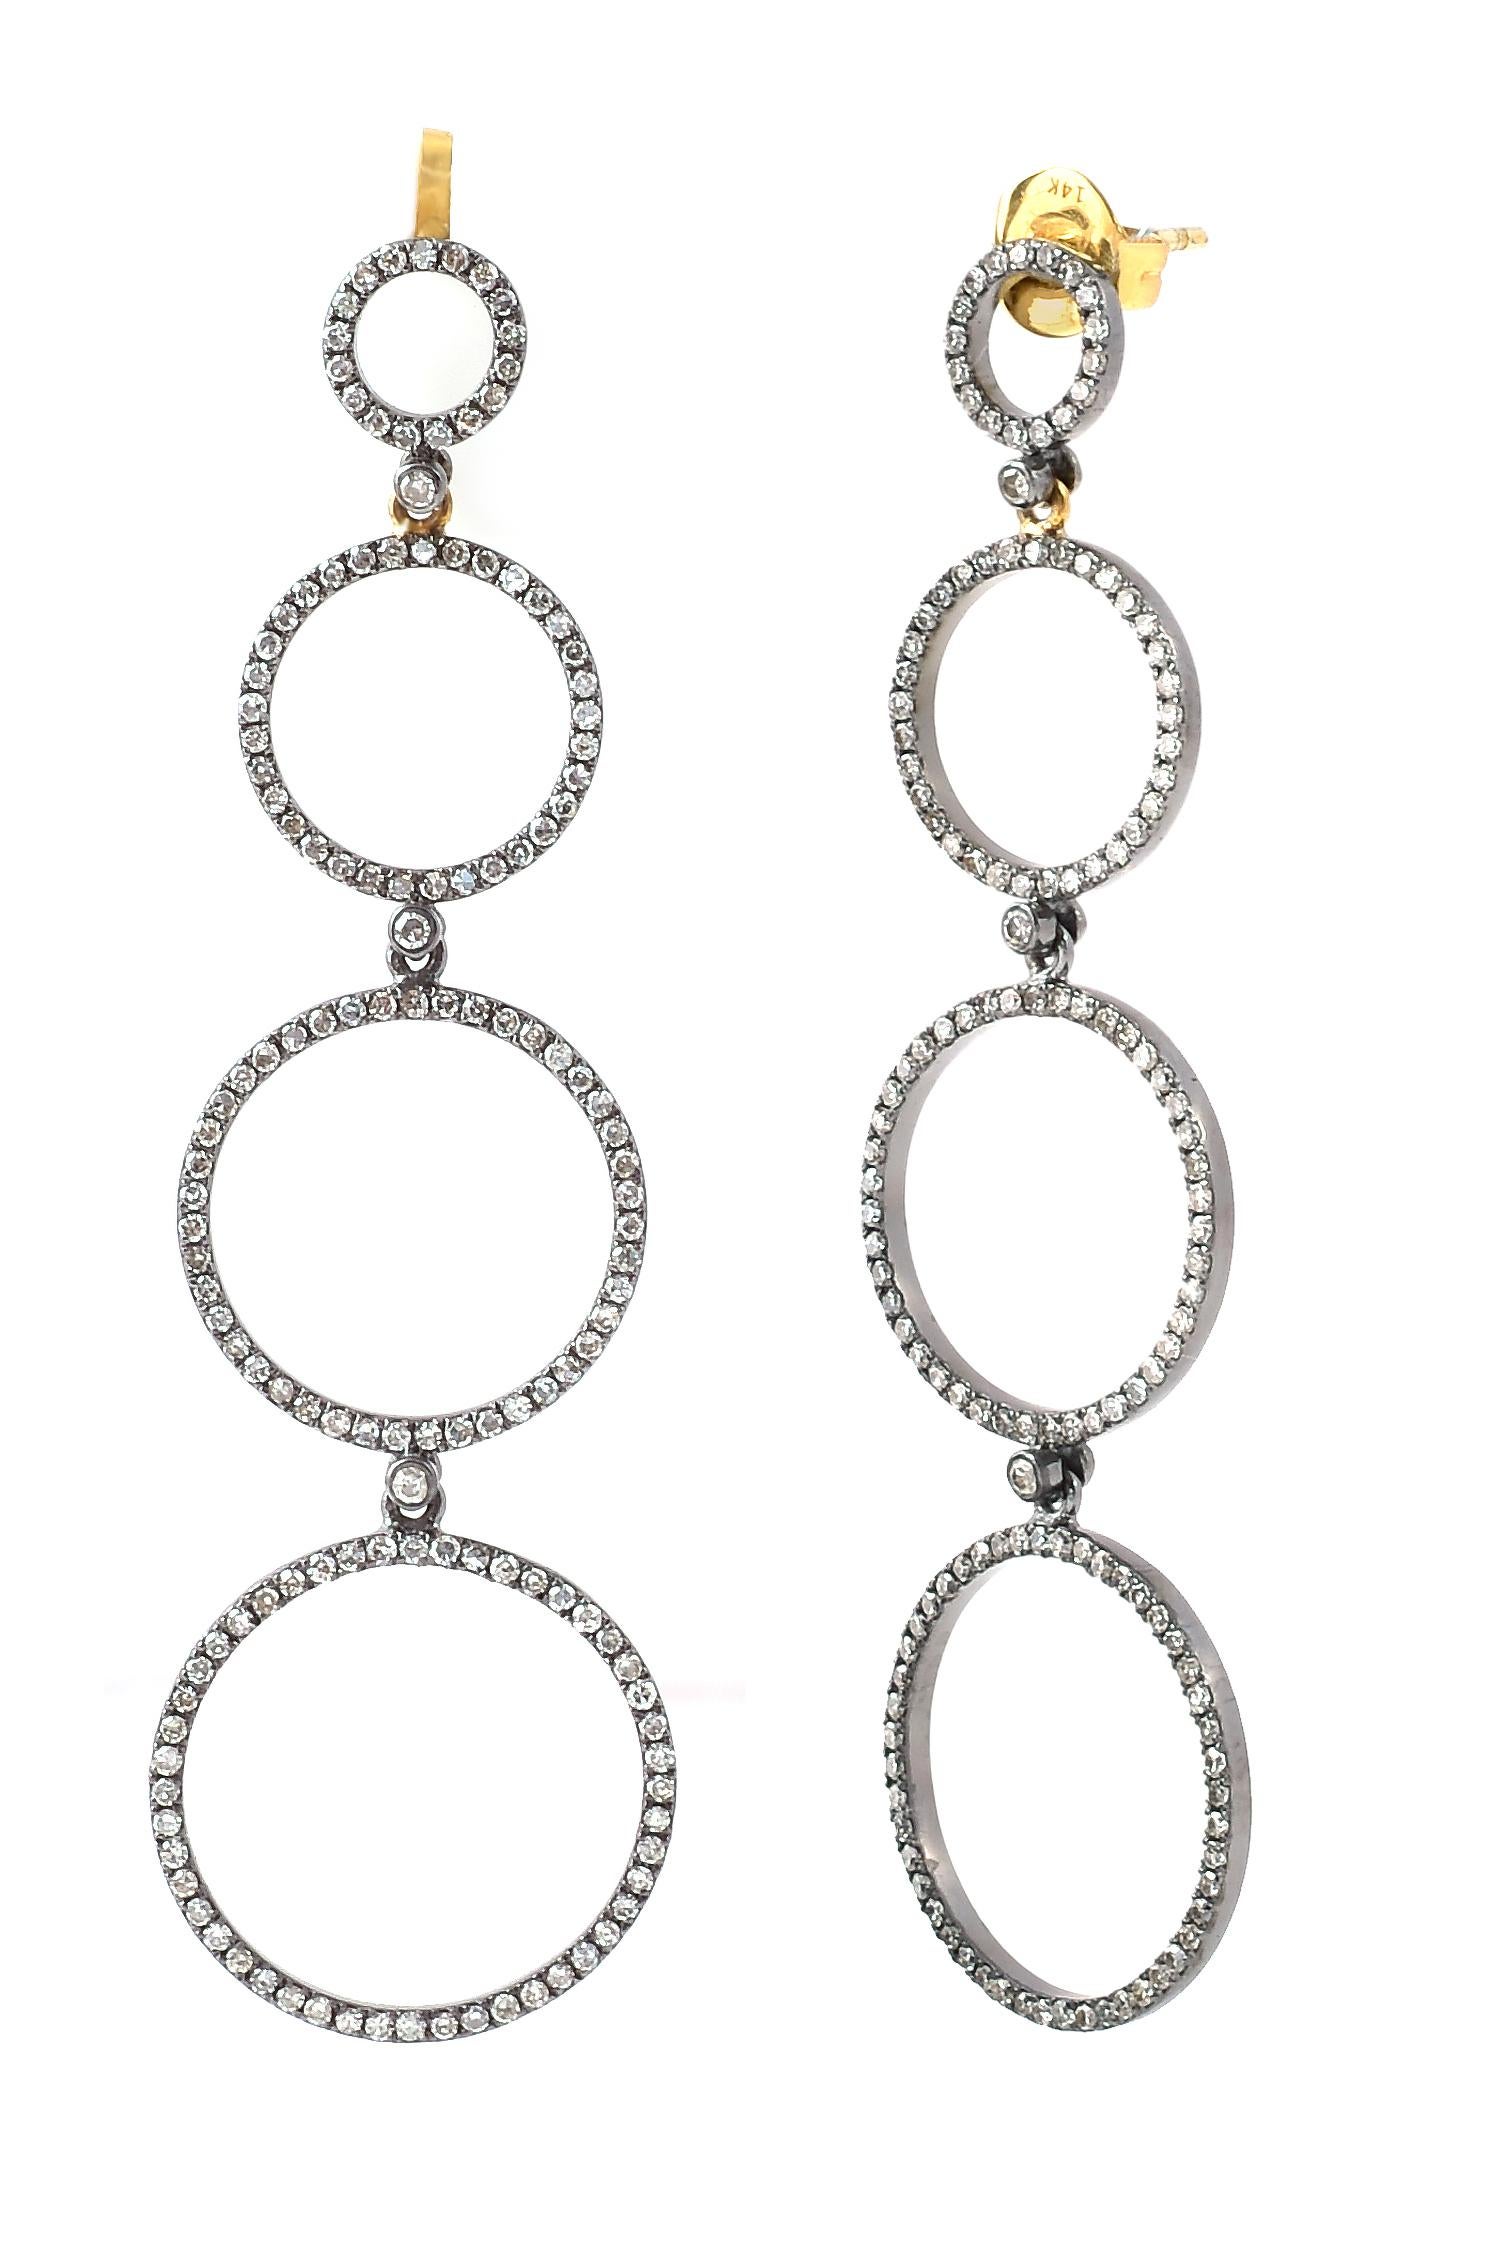 Round Cut 1.59 Carat Diamond Drop Cocktail Earrings in Victorian Style For Sale